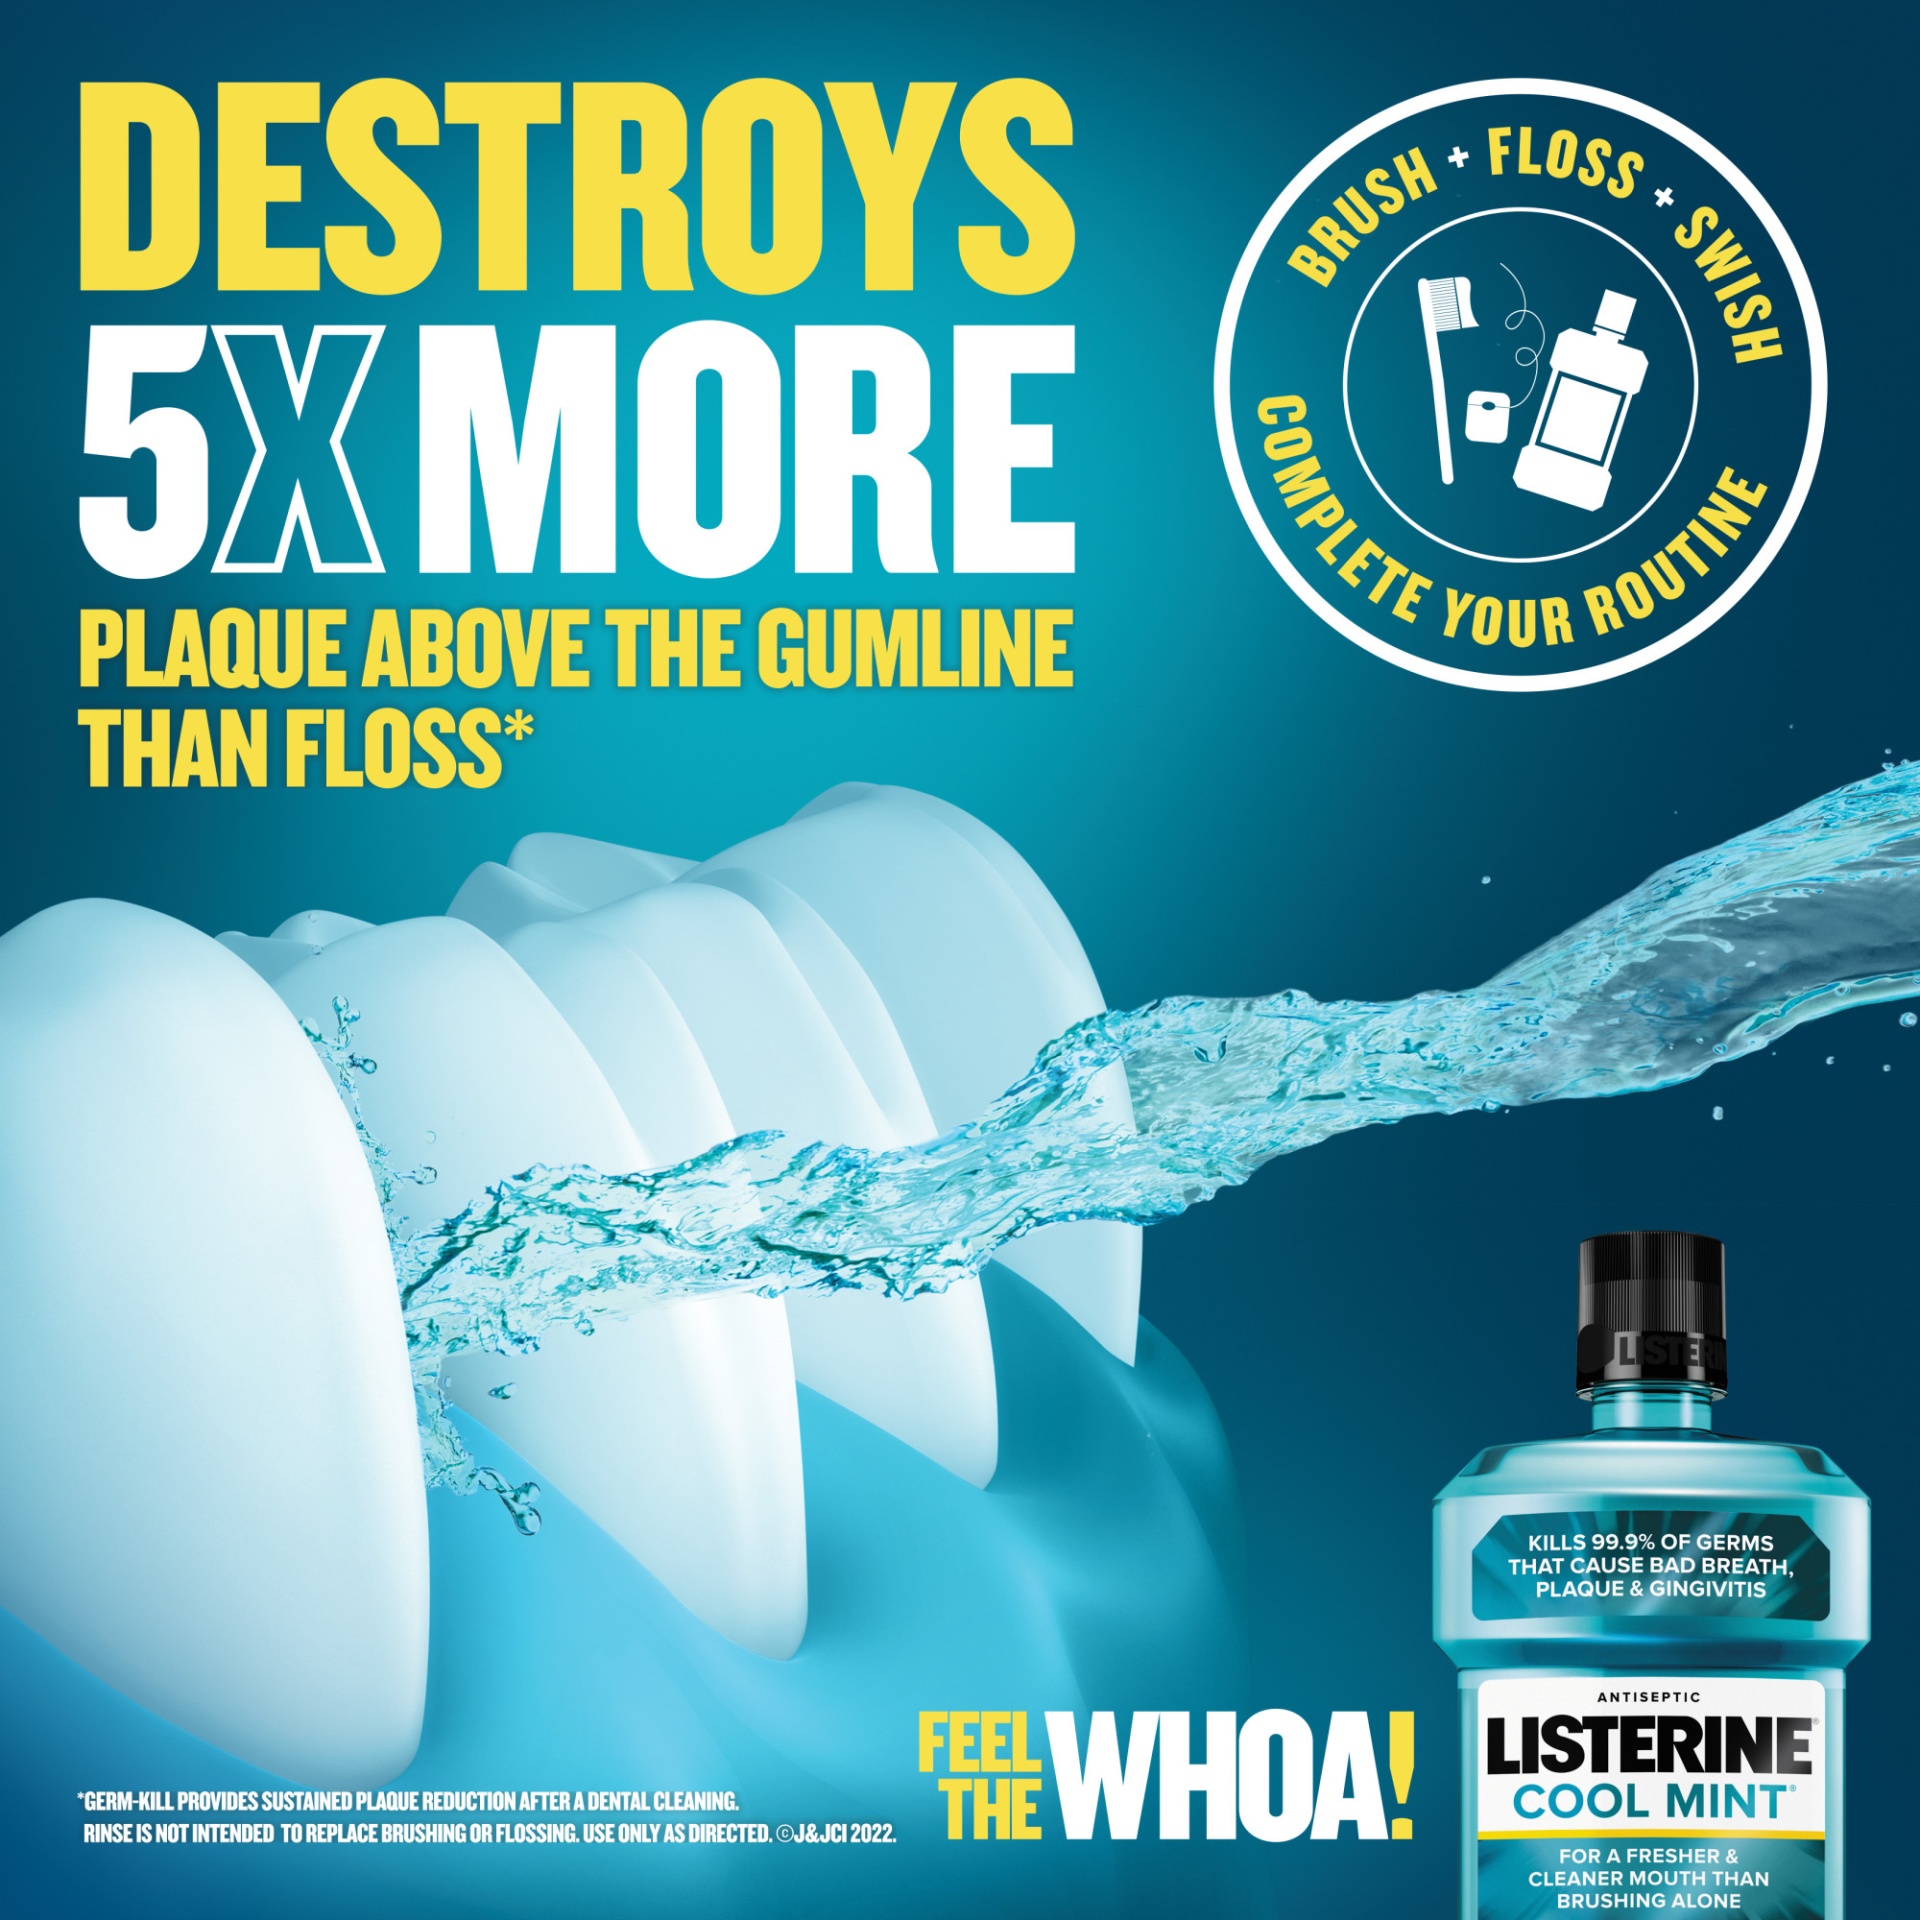 slide 6 of 7, Listerine Cool Mint Antiseptic Oral Care Mouthwash to Kill 99% of Germs that Cause Bad Breath, Plaque and Gingivitis, ADA-Accepted Mouthwash, Cool Mint Flavored Oral Rinse, 1 liter